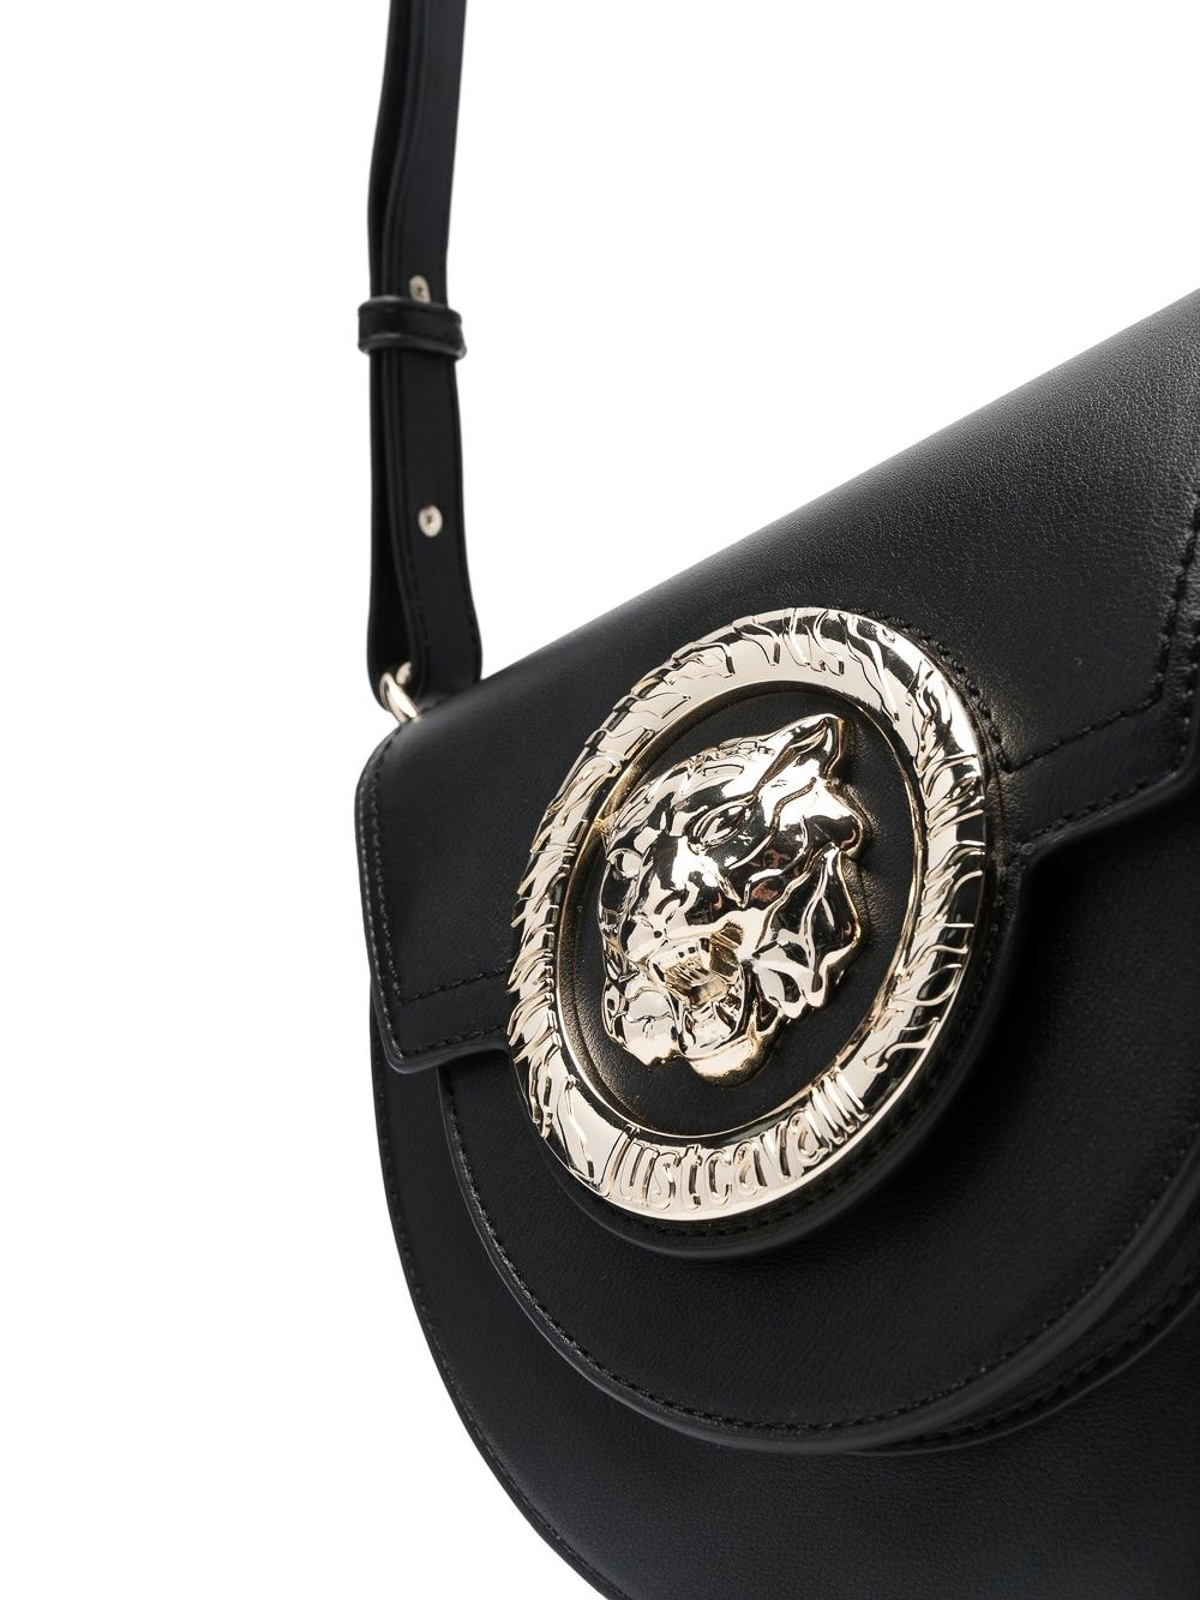 Buy Roberto Cavalli bags and purses on sale | Marie Claire Edit